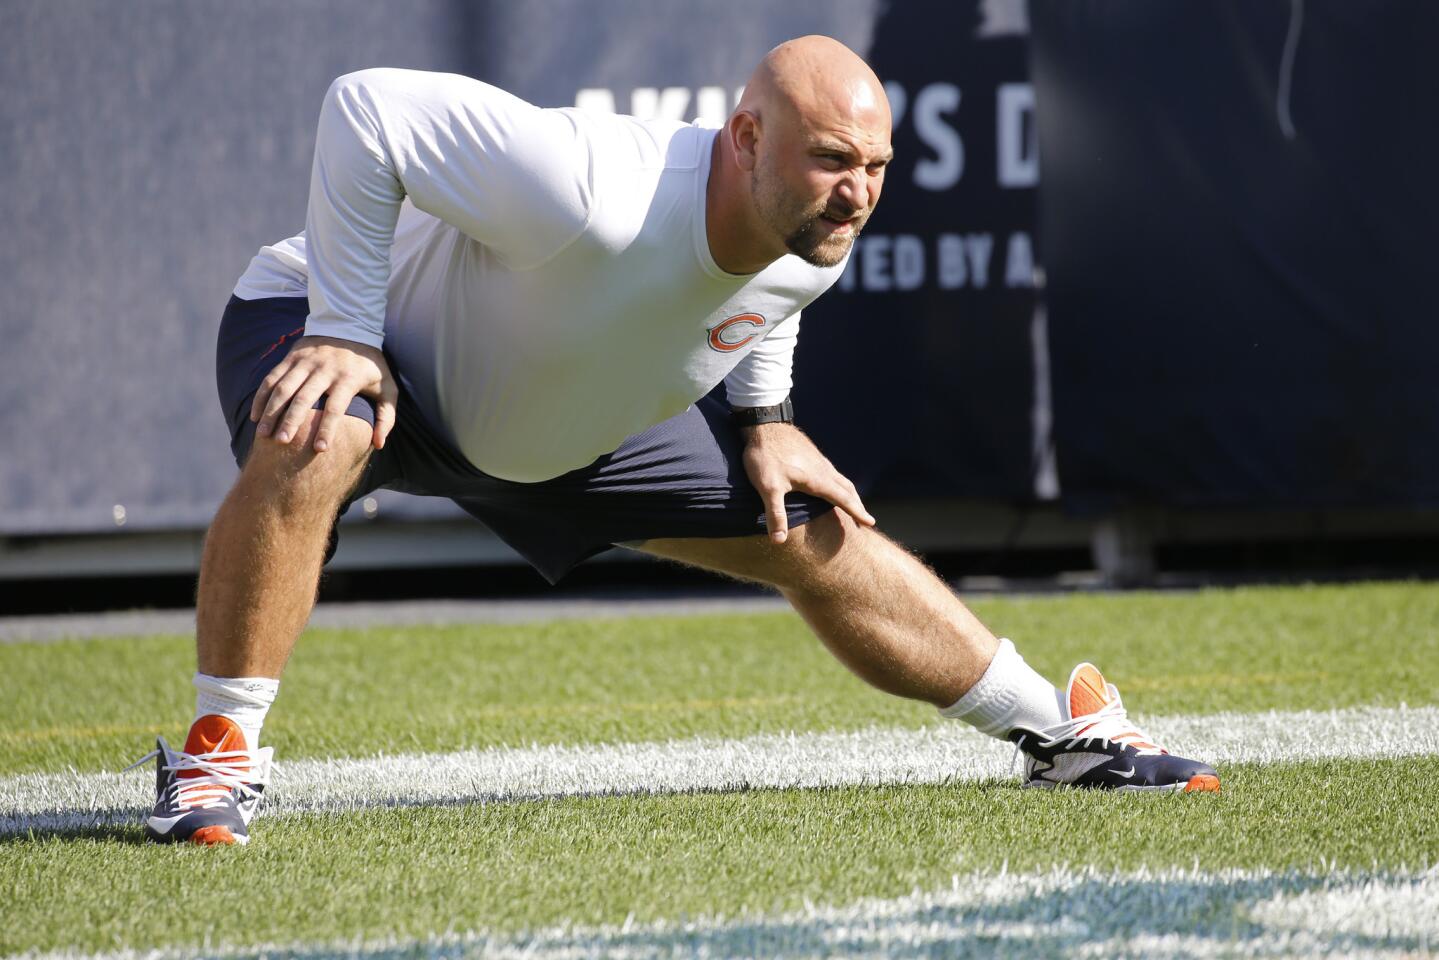 Bears offensive guard Kyle Long stretches during warmups before a game against the Steelers at Soldier Field on Sunday, Sept. 24, 2017.